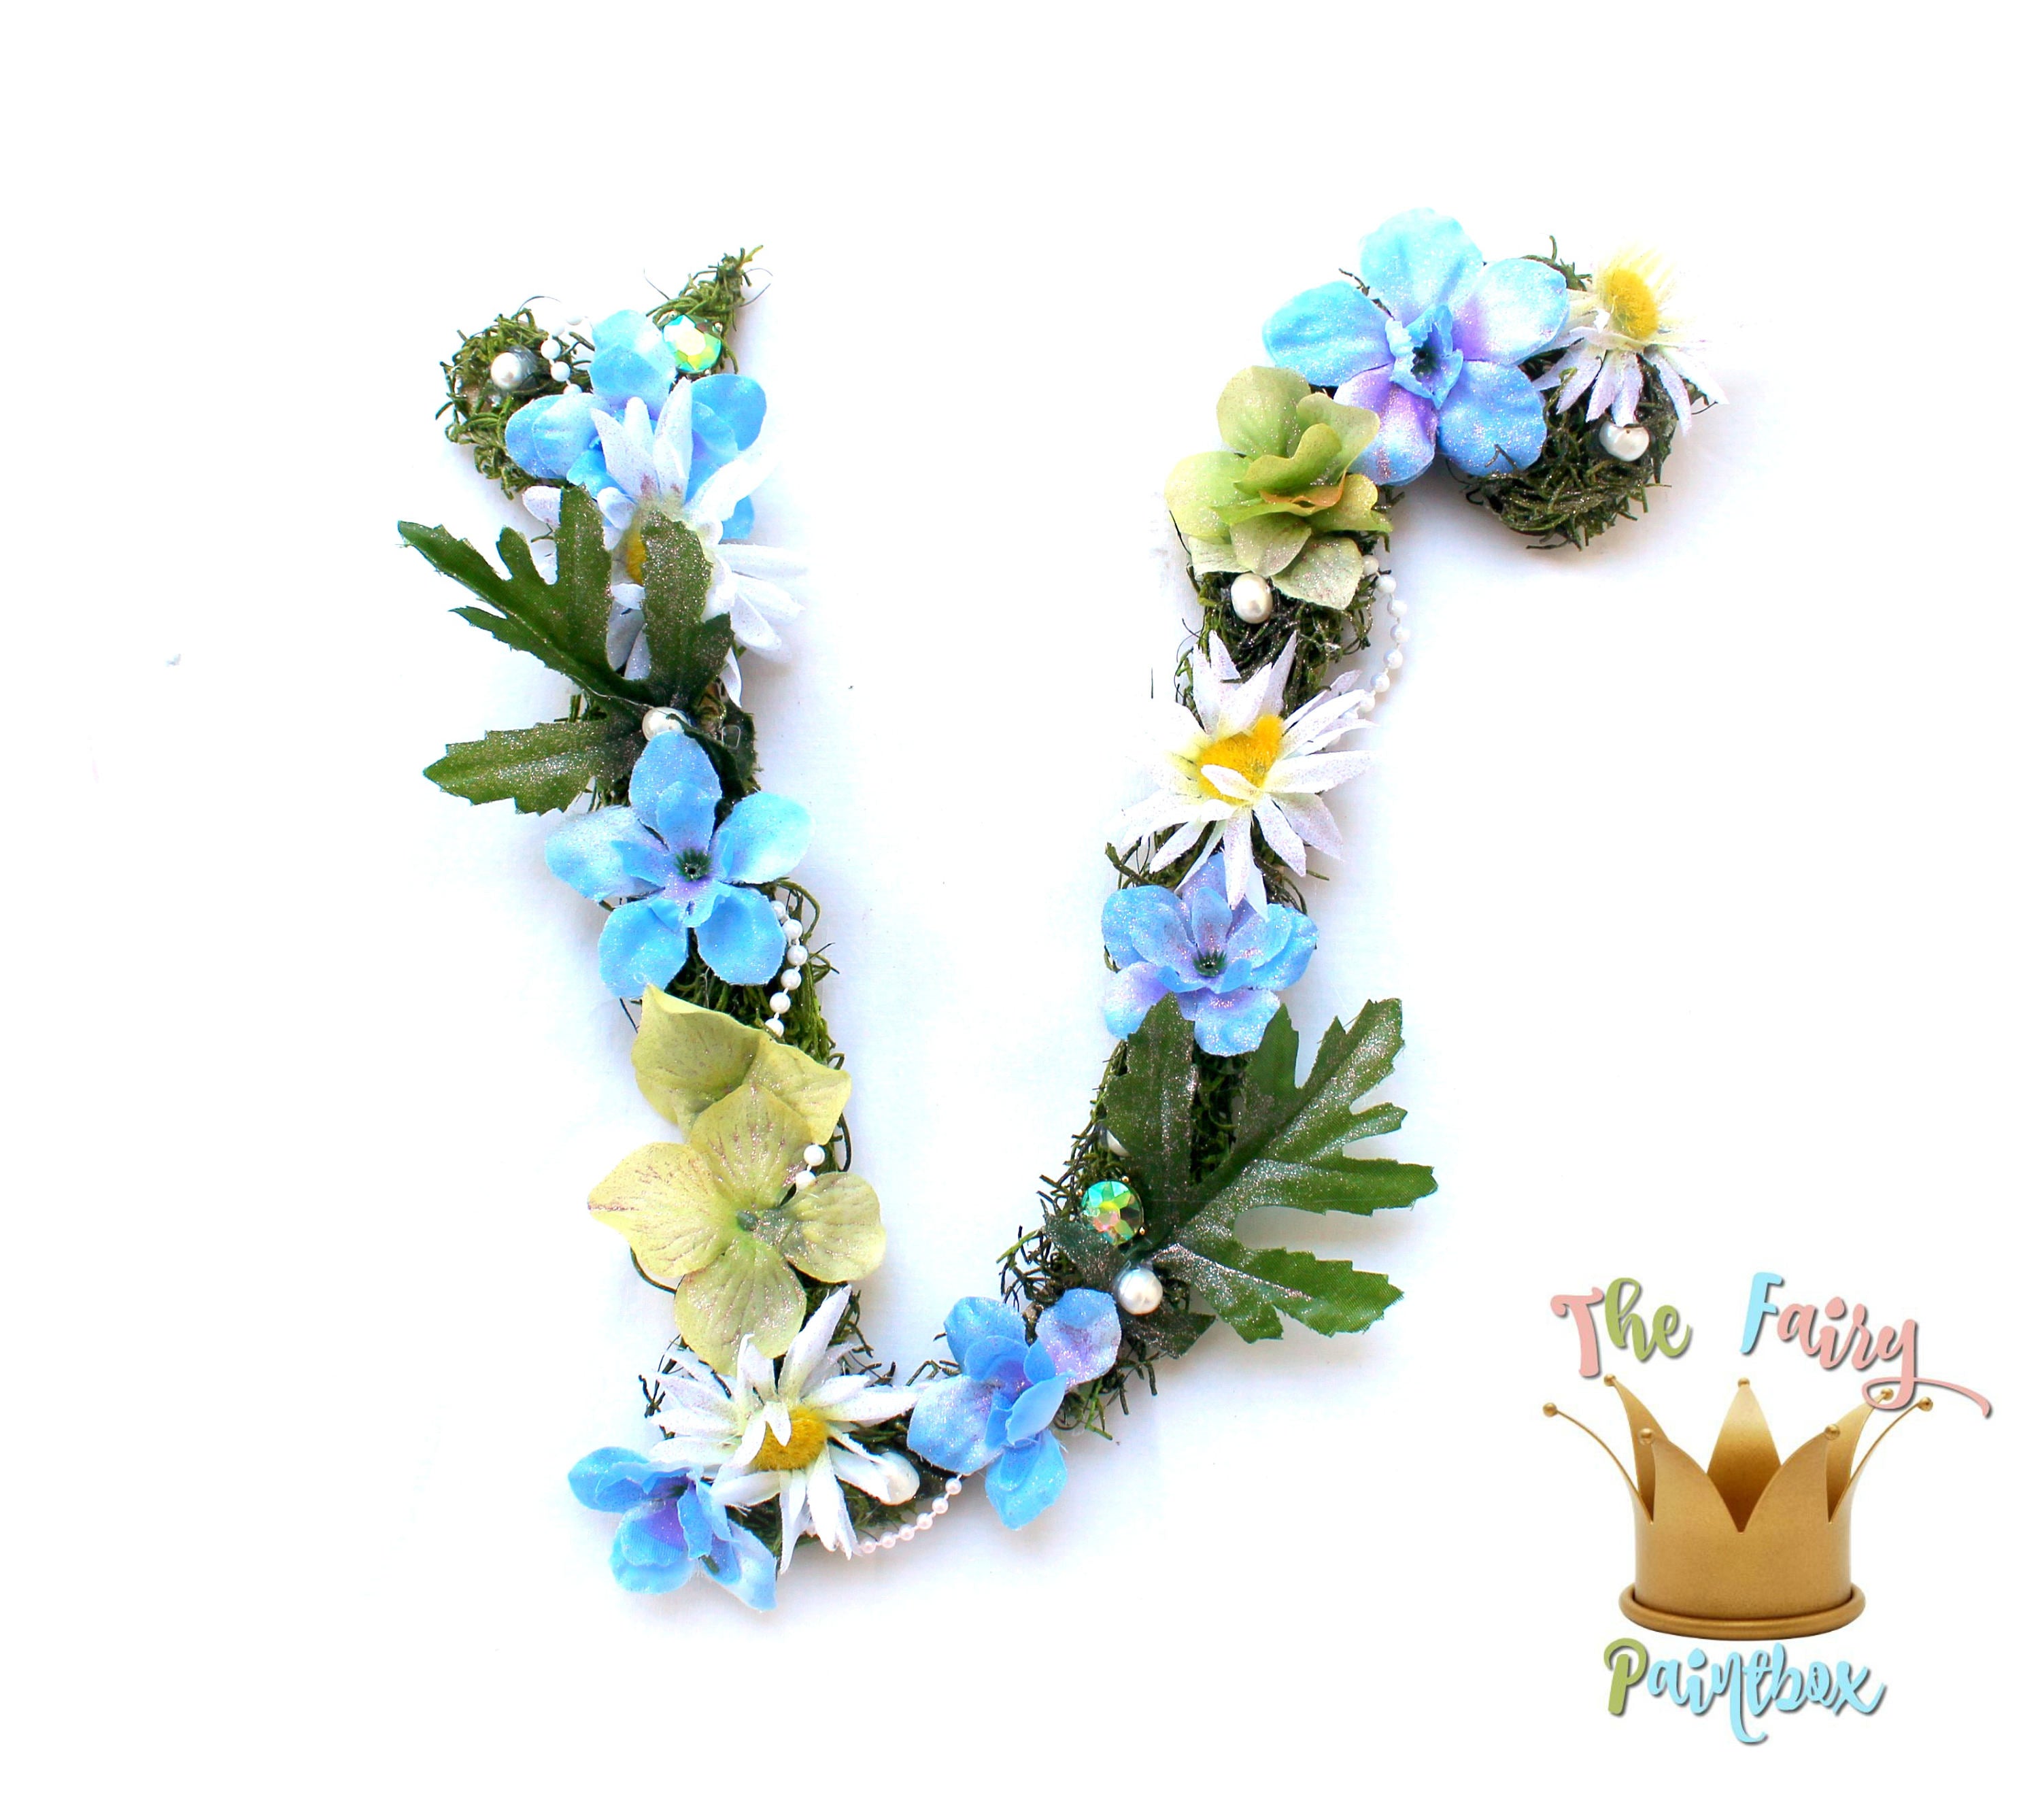 Monogram Baby Blue Floral Bow – The Little Llama co